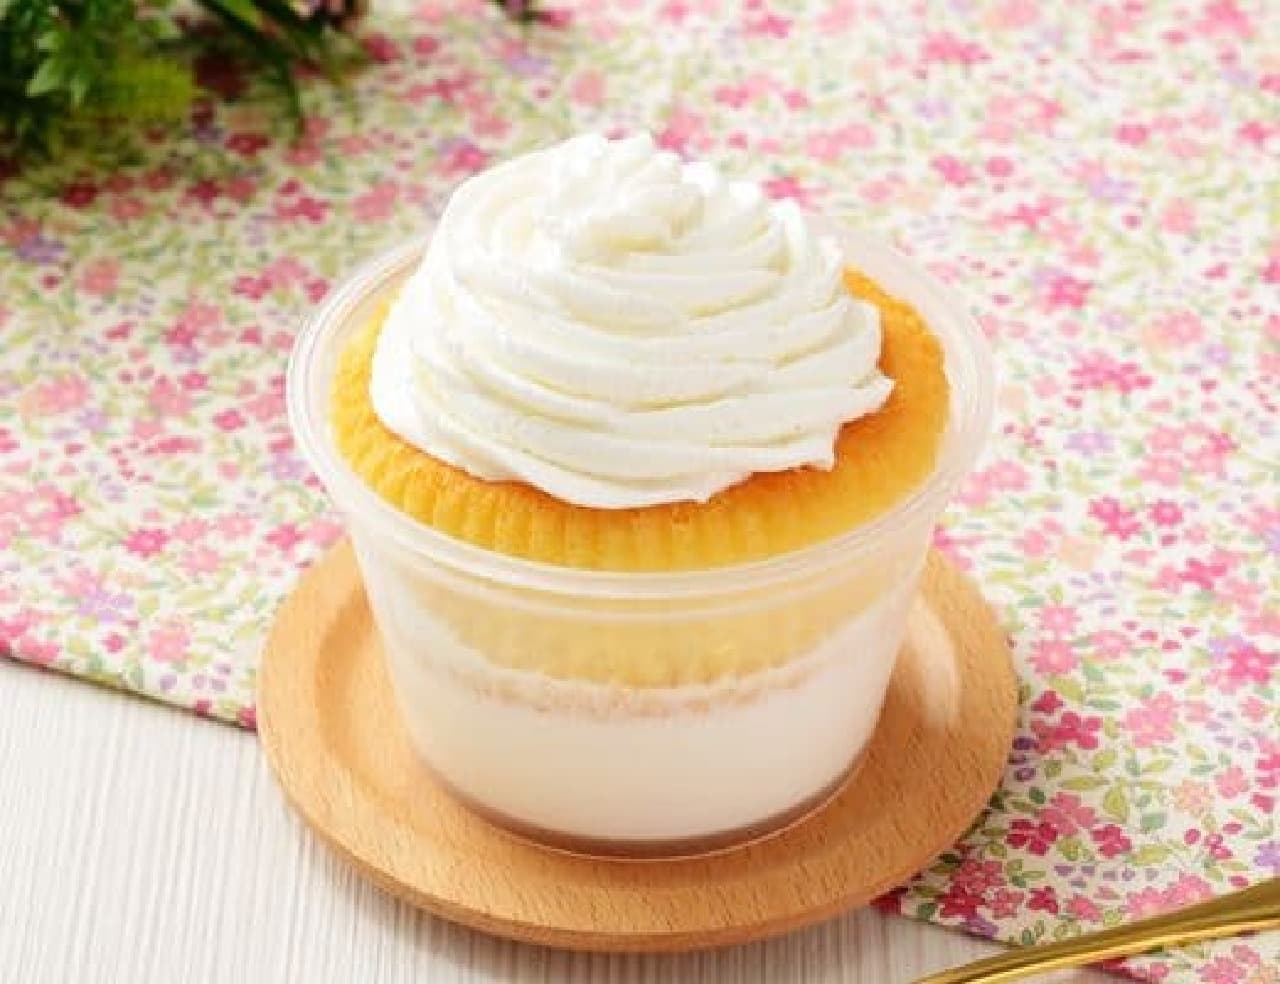 Lawson "Chiffon Cake with Drowned Cream